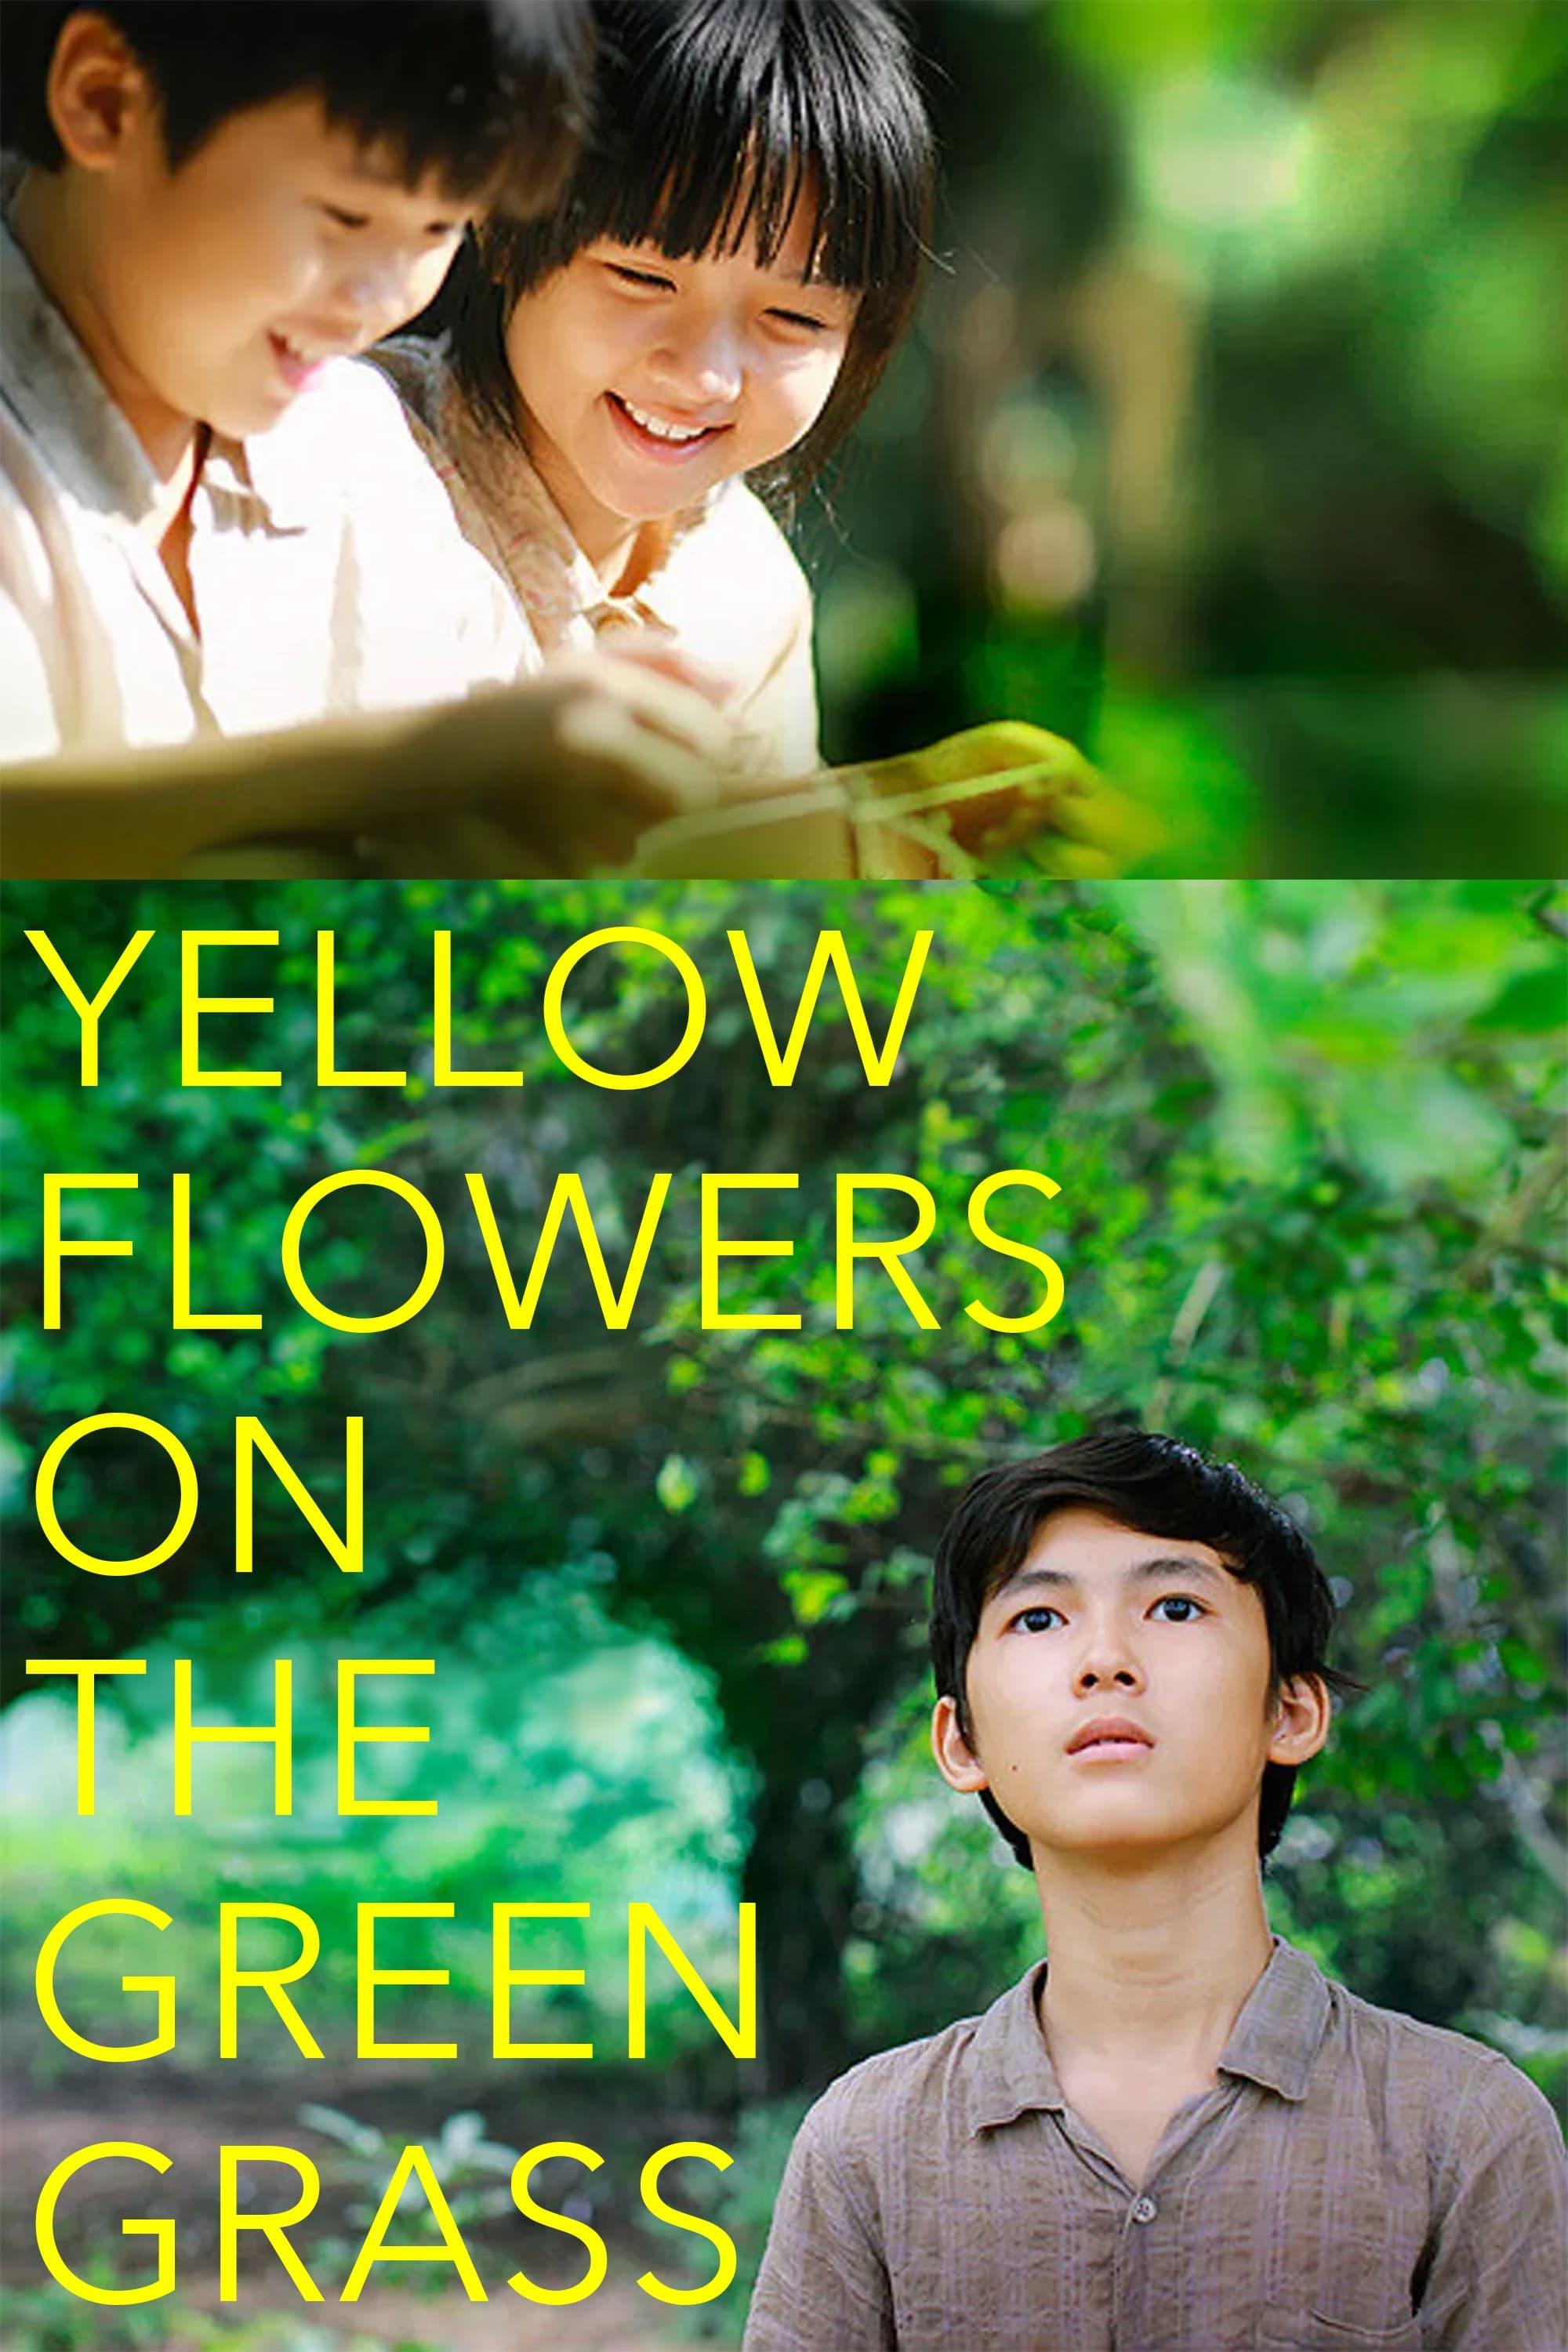 Yellow Flowers On the Green Grass poster